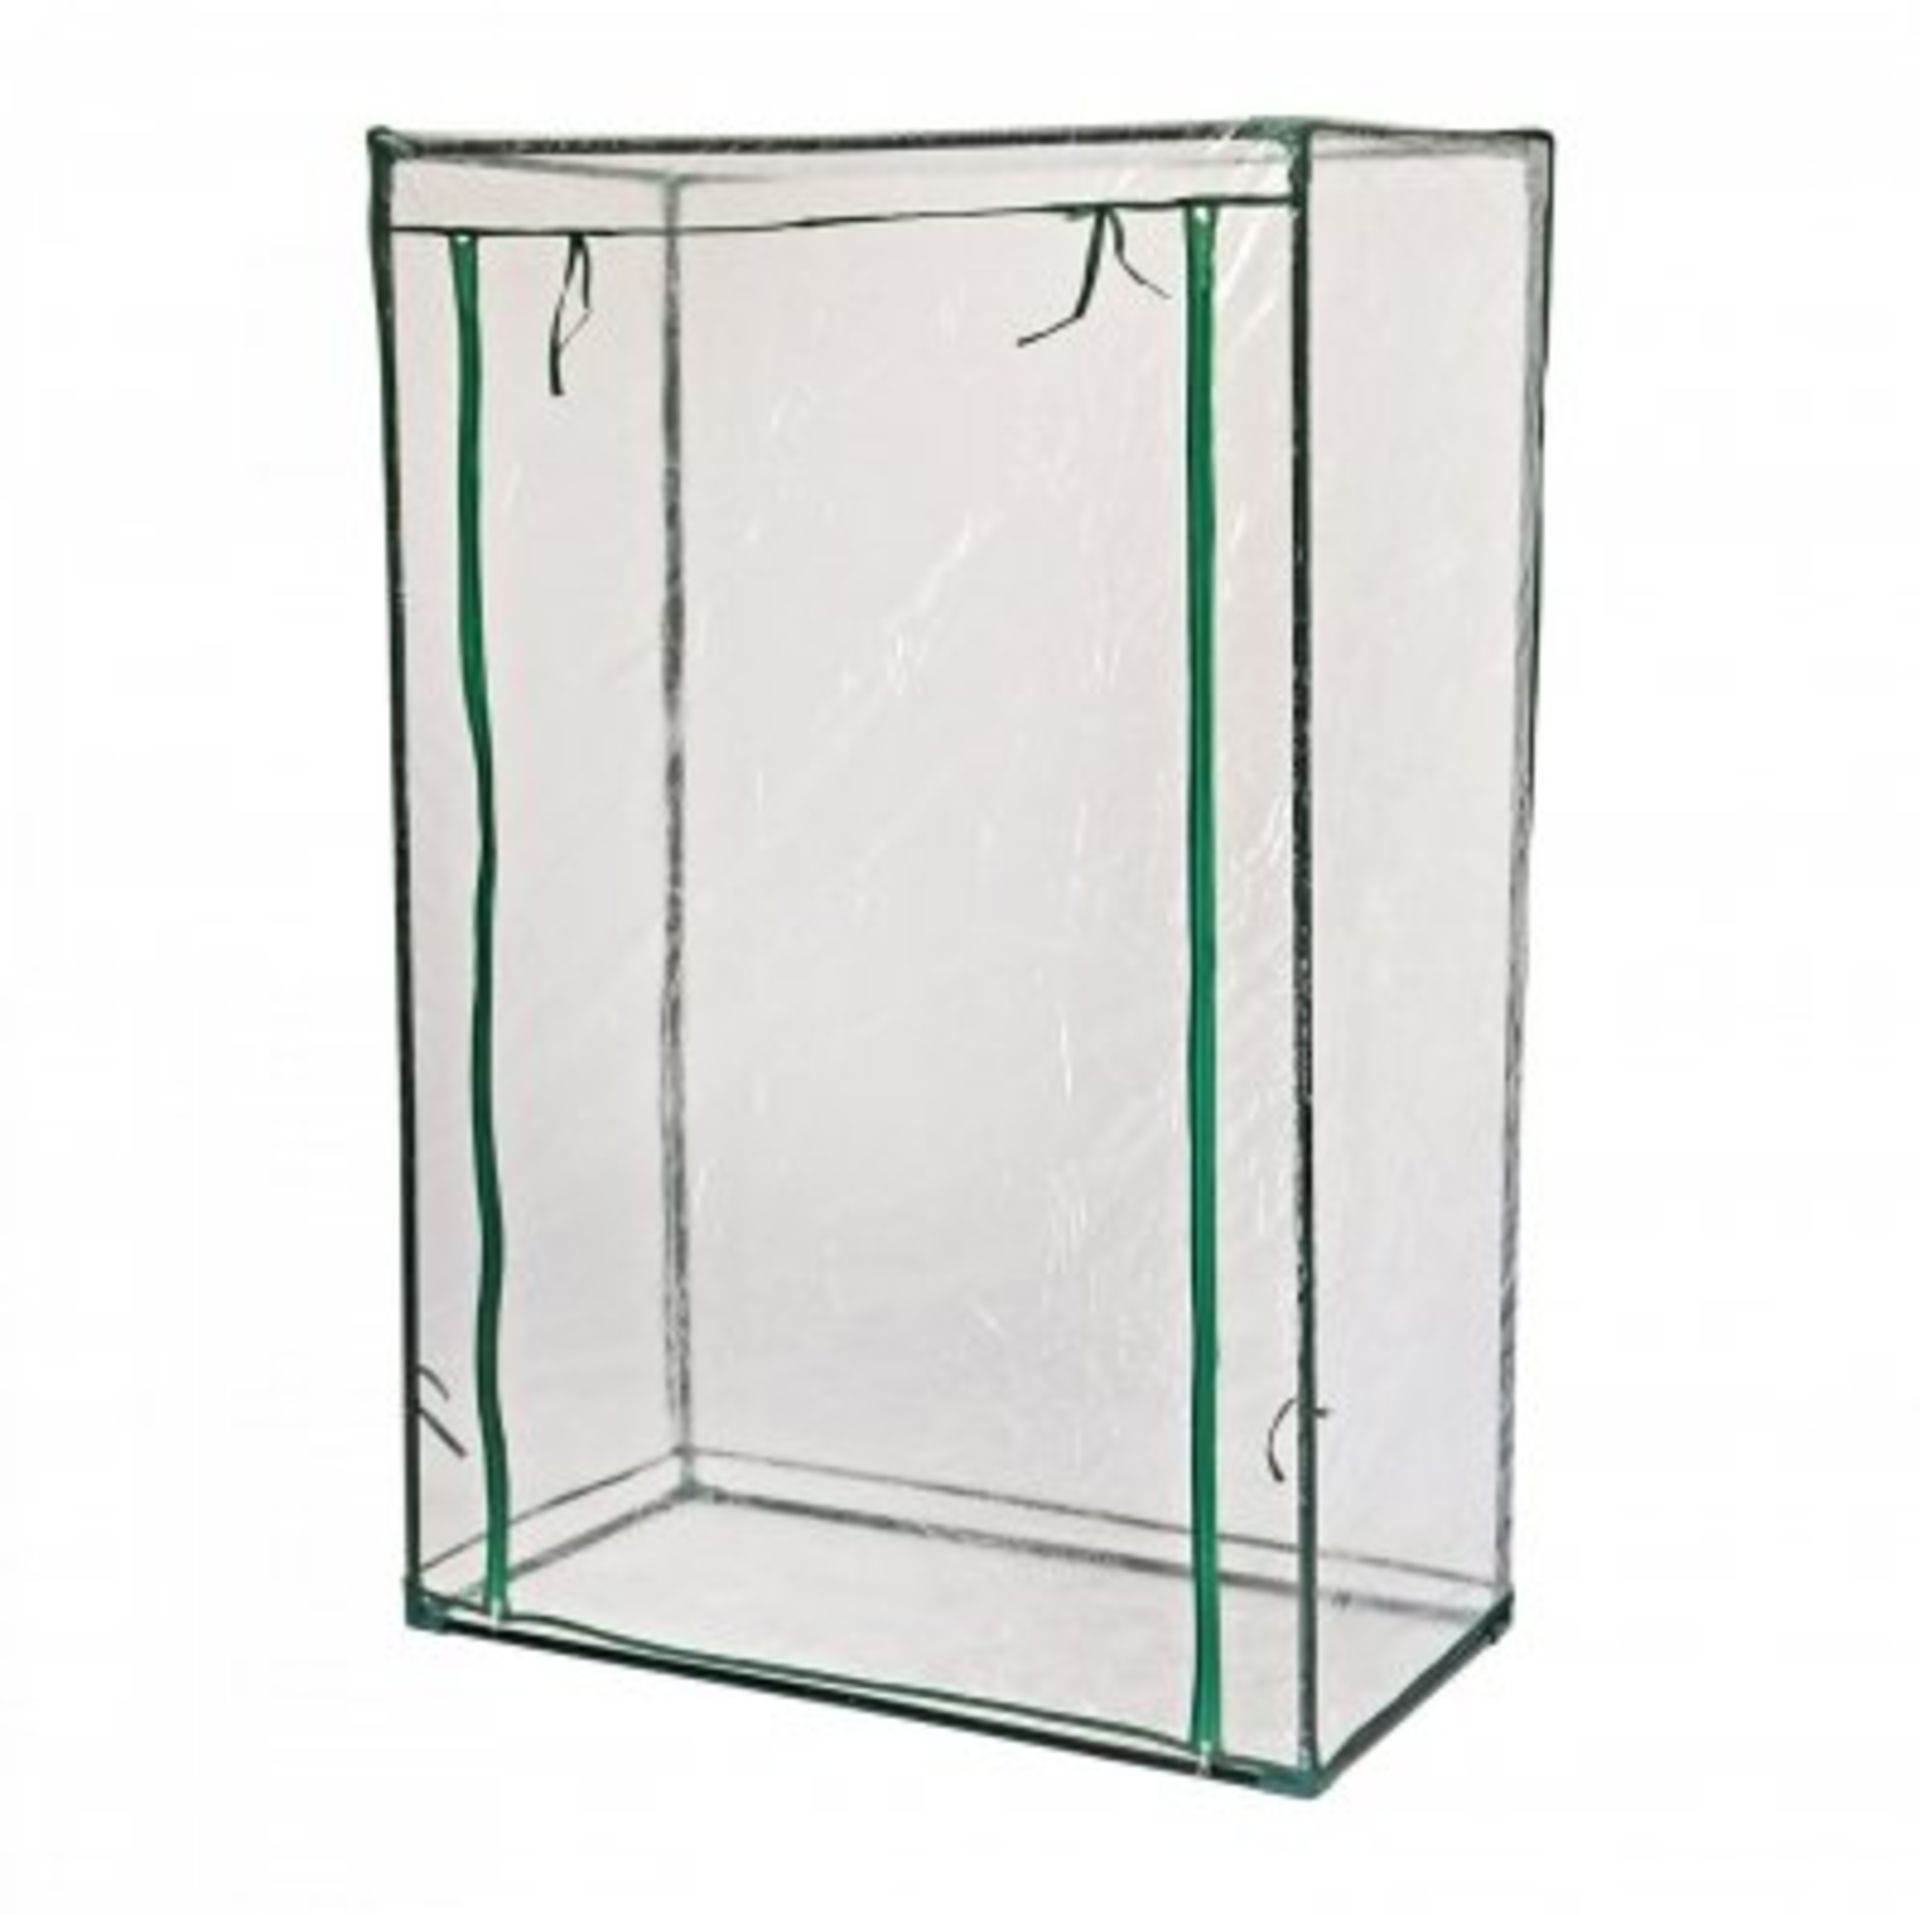 (SK24) Mini Growbag Tomato Growhouse Garden Greenhouse with PVC Cover Our mini greenhouse ...